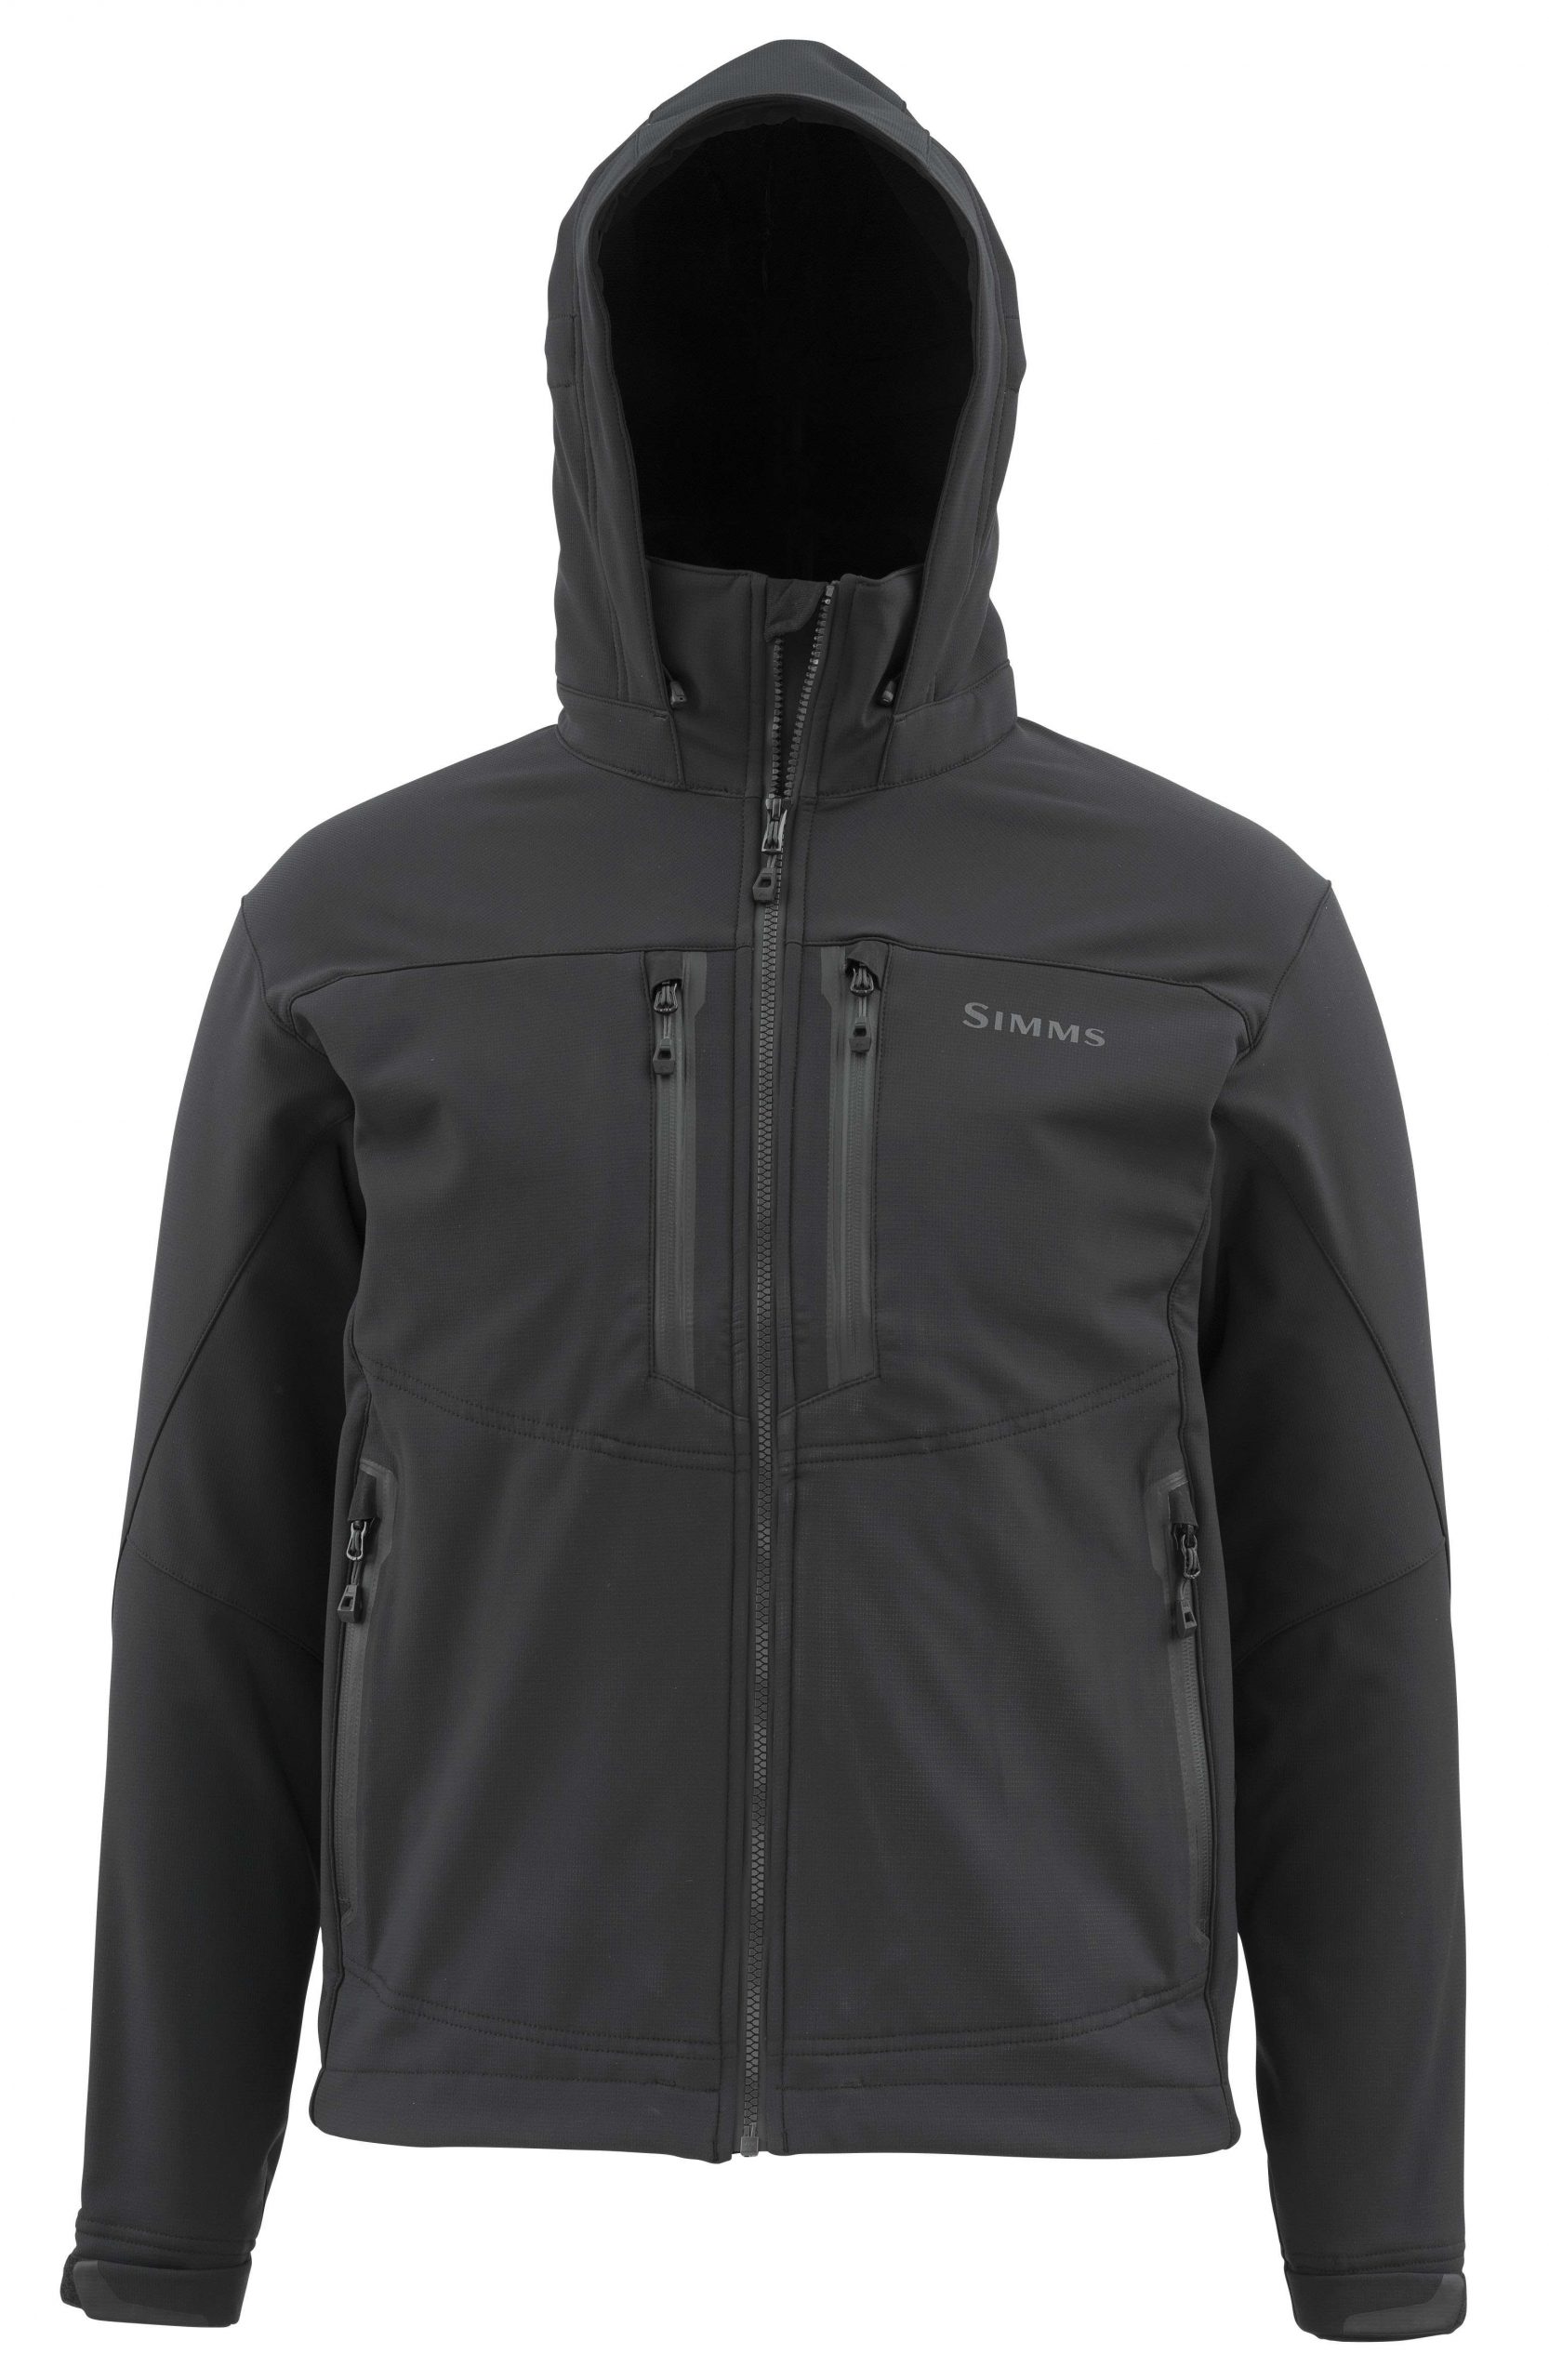 <b>Simms</b><br>	Windstopper Guide Hoody<br>				The new WINDSTOPPER Guide Hoody showcases three-layer abrasion-resistant fabric technology for fighting the elements on the water. The 100 percent nylon rip-stop face incorporates four-way stretch for maximum range of moment while casting, and the high-loft micro-check fleece backer provides warmth. Simmsâ three-point adjustable storm hood and YKK water-resistant zippers insulate anglers from squalls. Two zippered mesh-lined hand-warmer pockets offer reprieve from the wind and dual chest pockets keep gear close by.